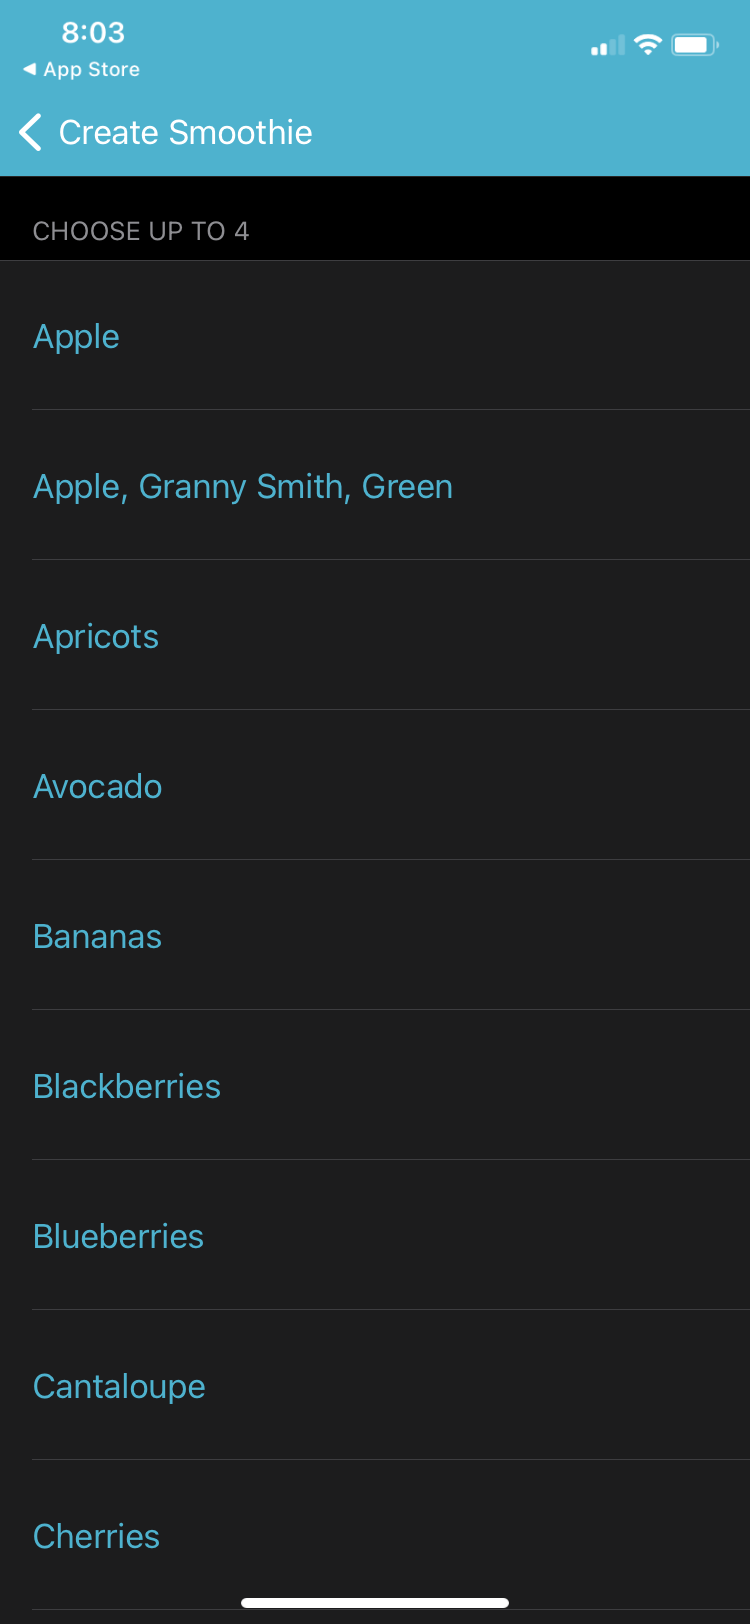 Simply Smoothies app fruit selection screen